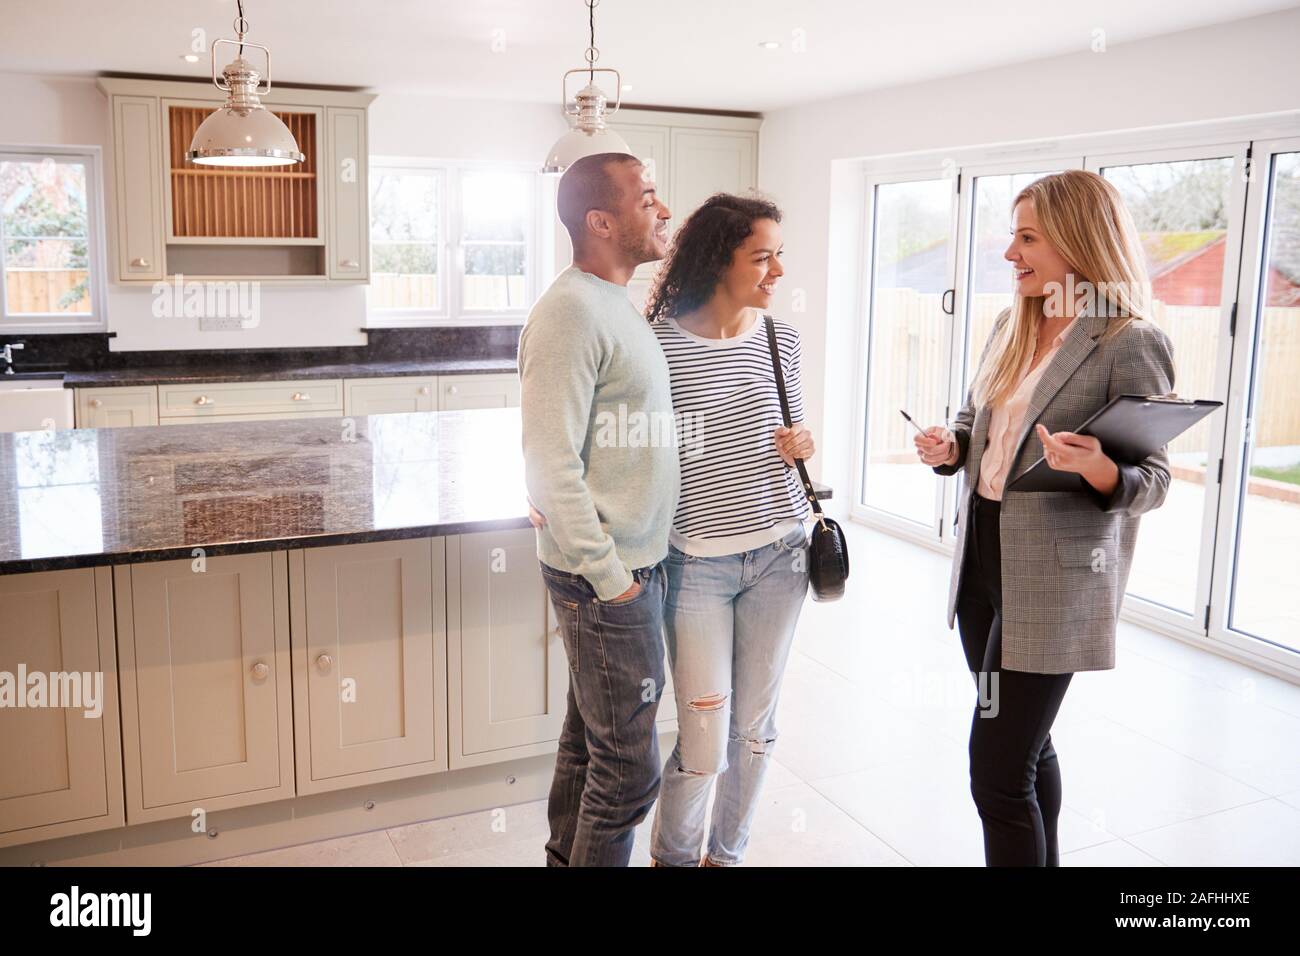 Female Realtor Showing Couple Interested In Buying Around House Stock Photo